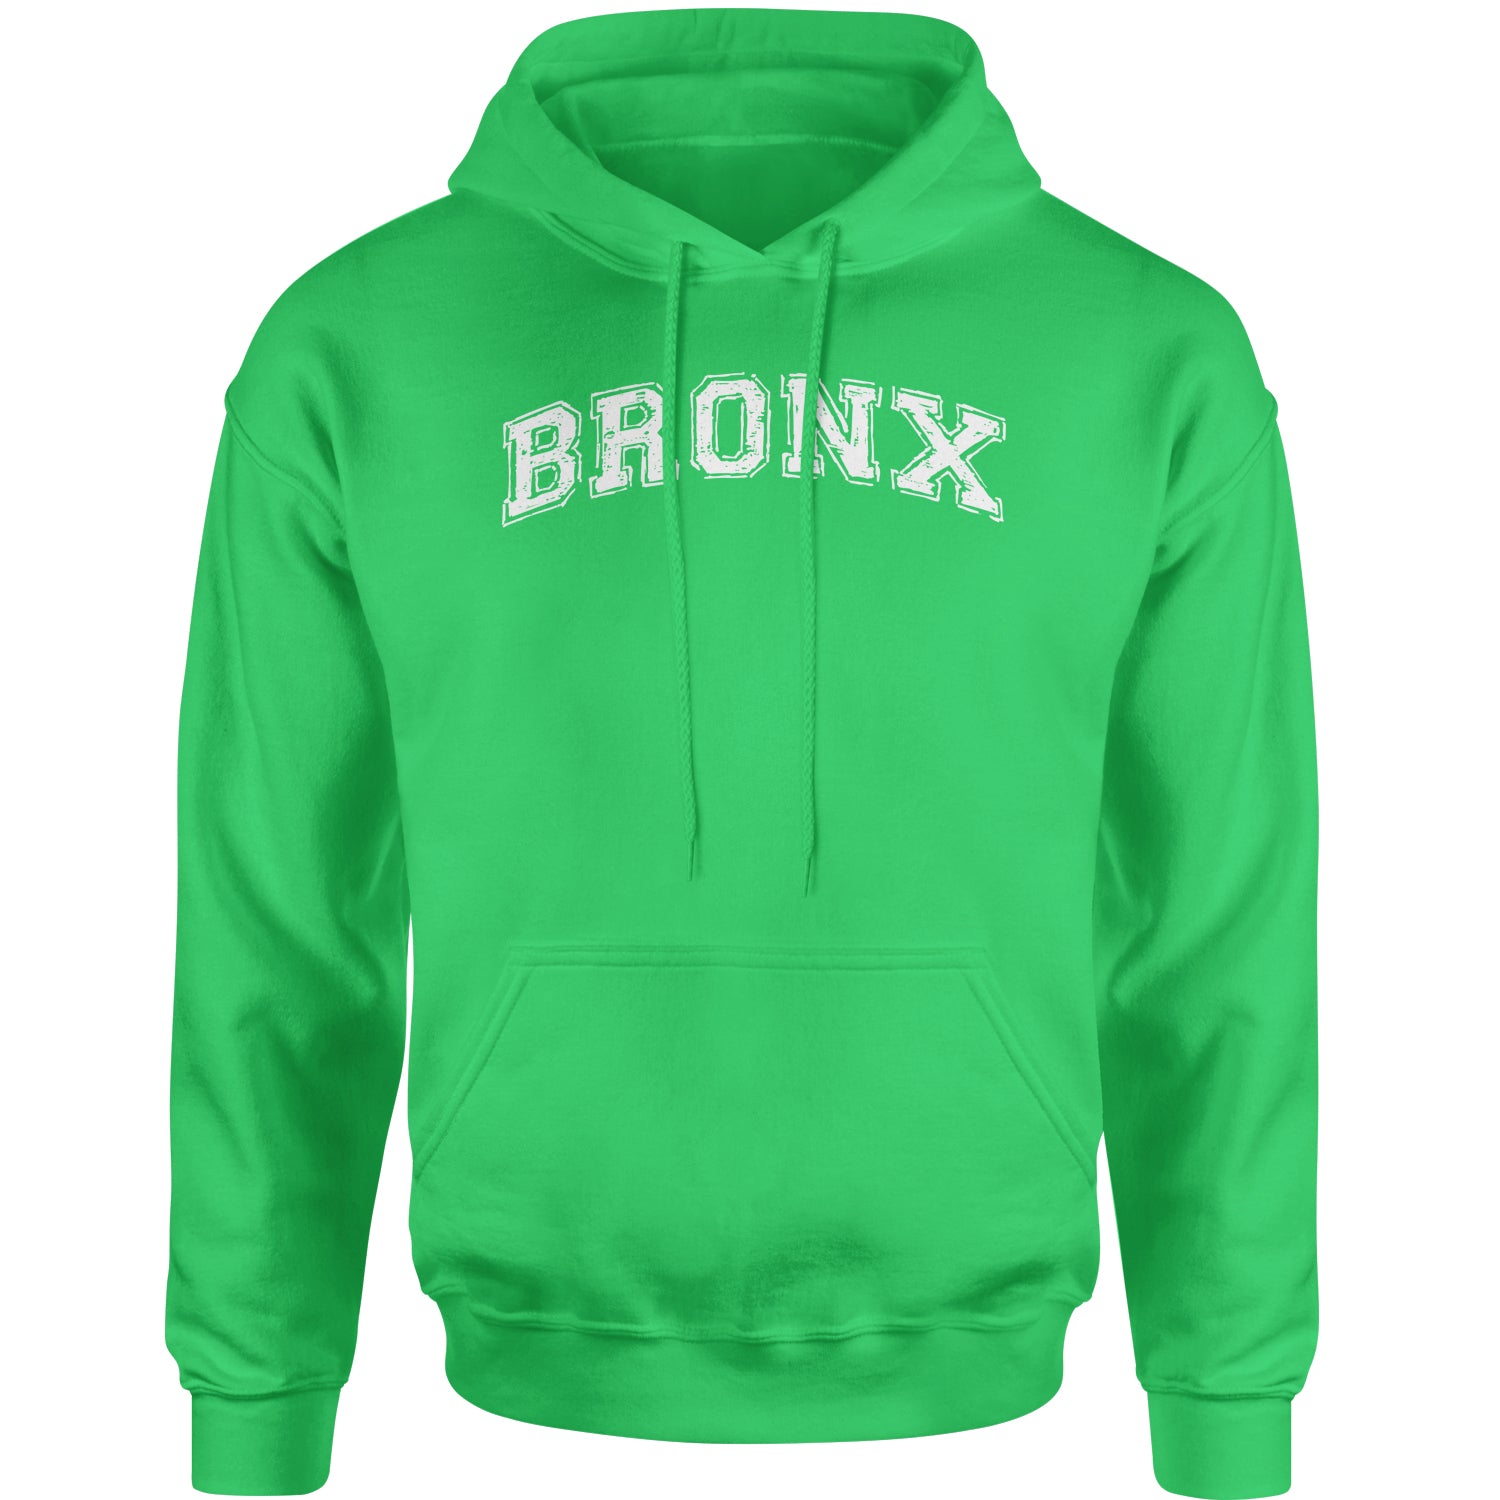 Bronx - From The Block Adult Hoodie Sweatshirt b, cardi, concert, its, Jennifer, lopez, merch, my, party, tour by Expression Tees